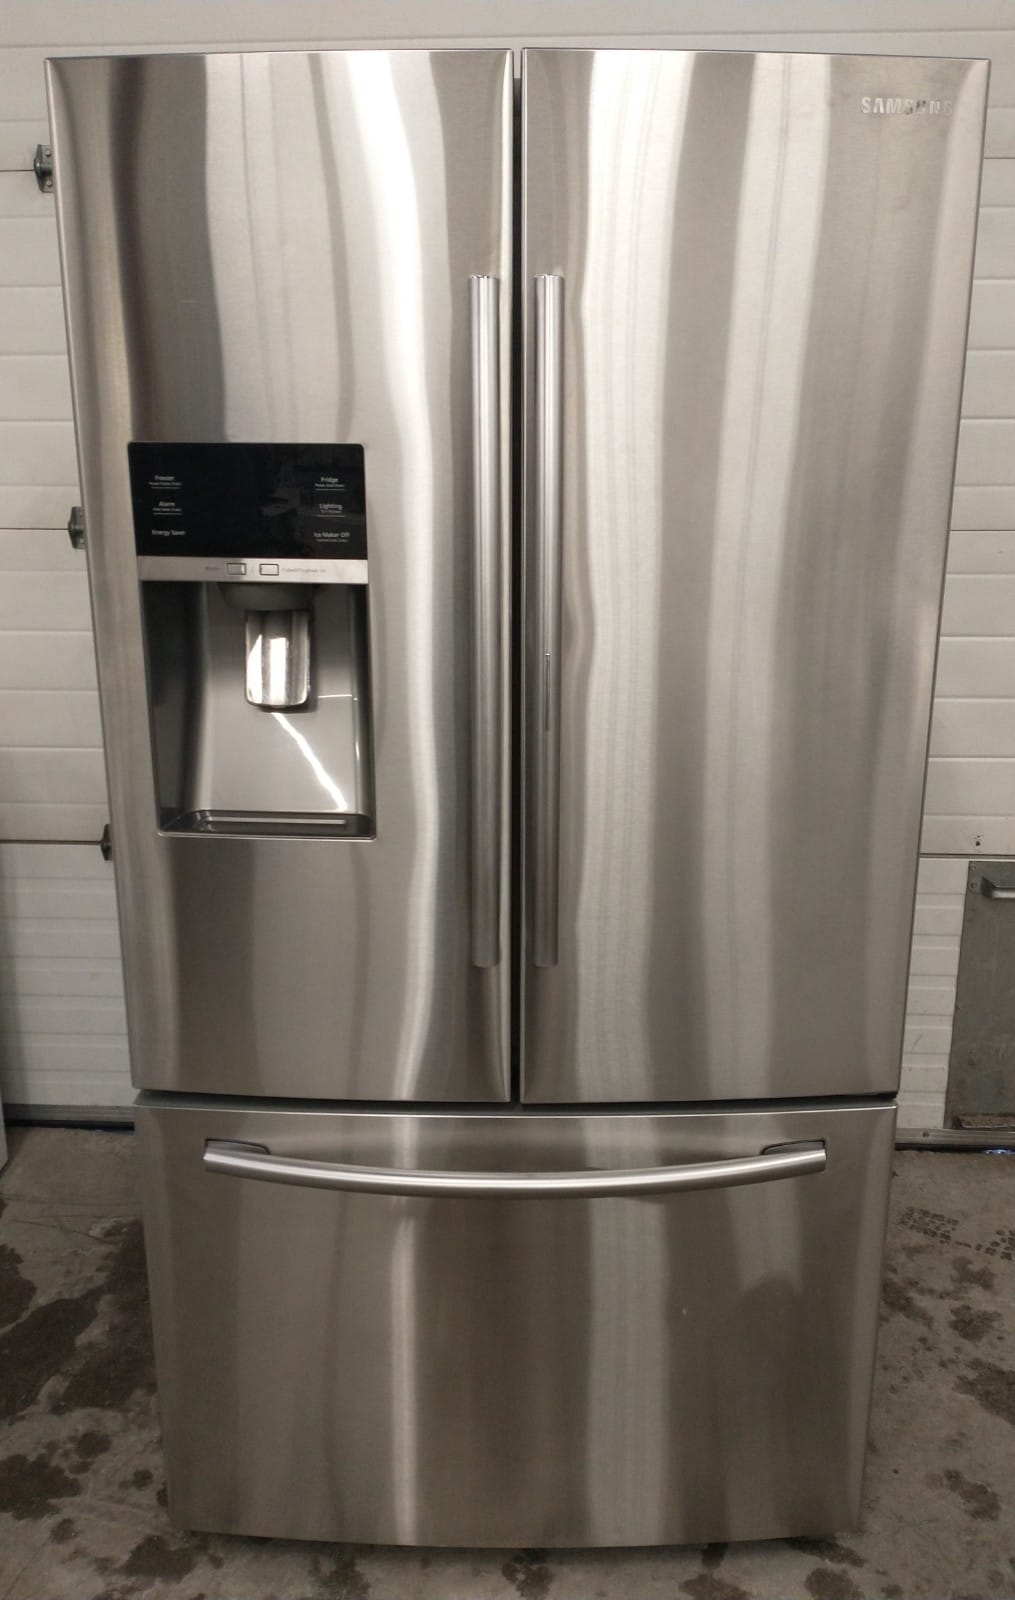 Order Your Used Refrigerator Samsung Rf28htedbsr/aa Today!